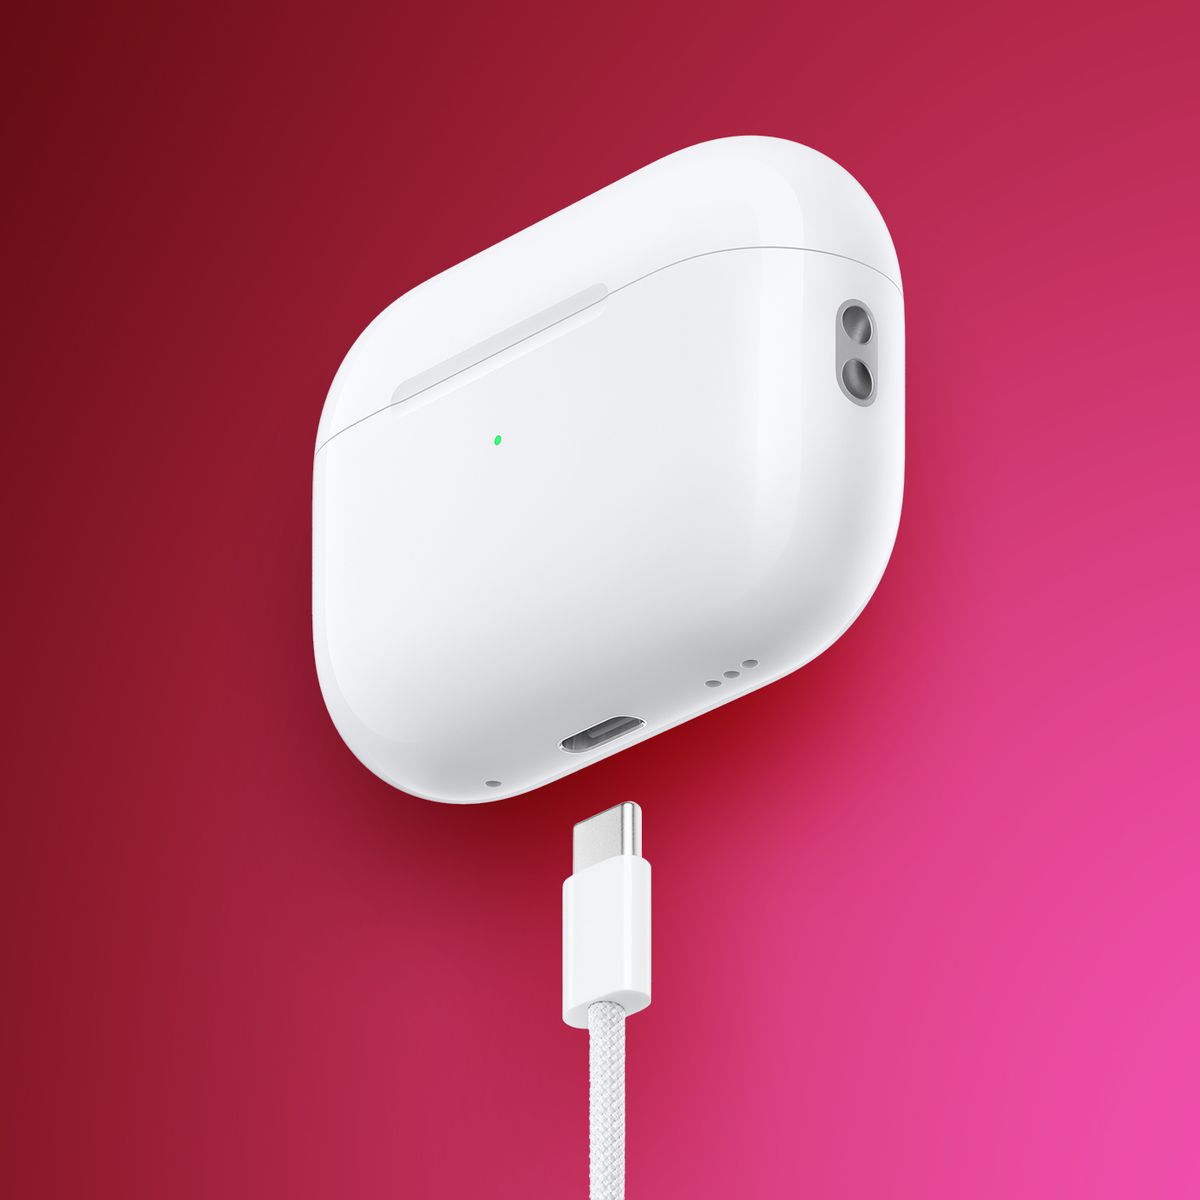 Get the New AirPods Pro 2 With USB-C for $199.99 Thanks to 